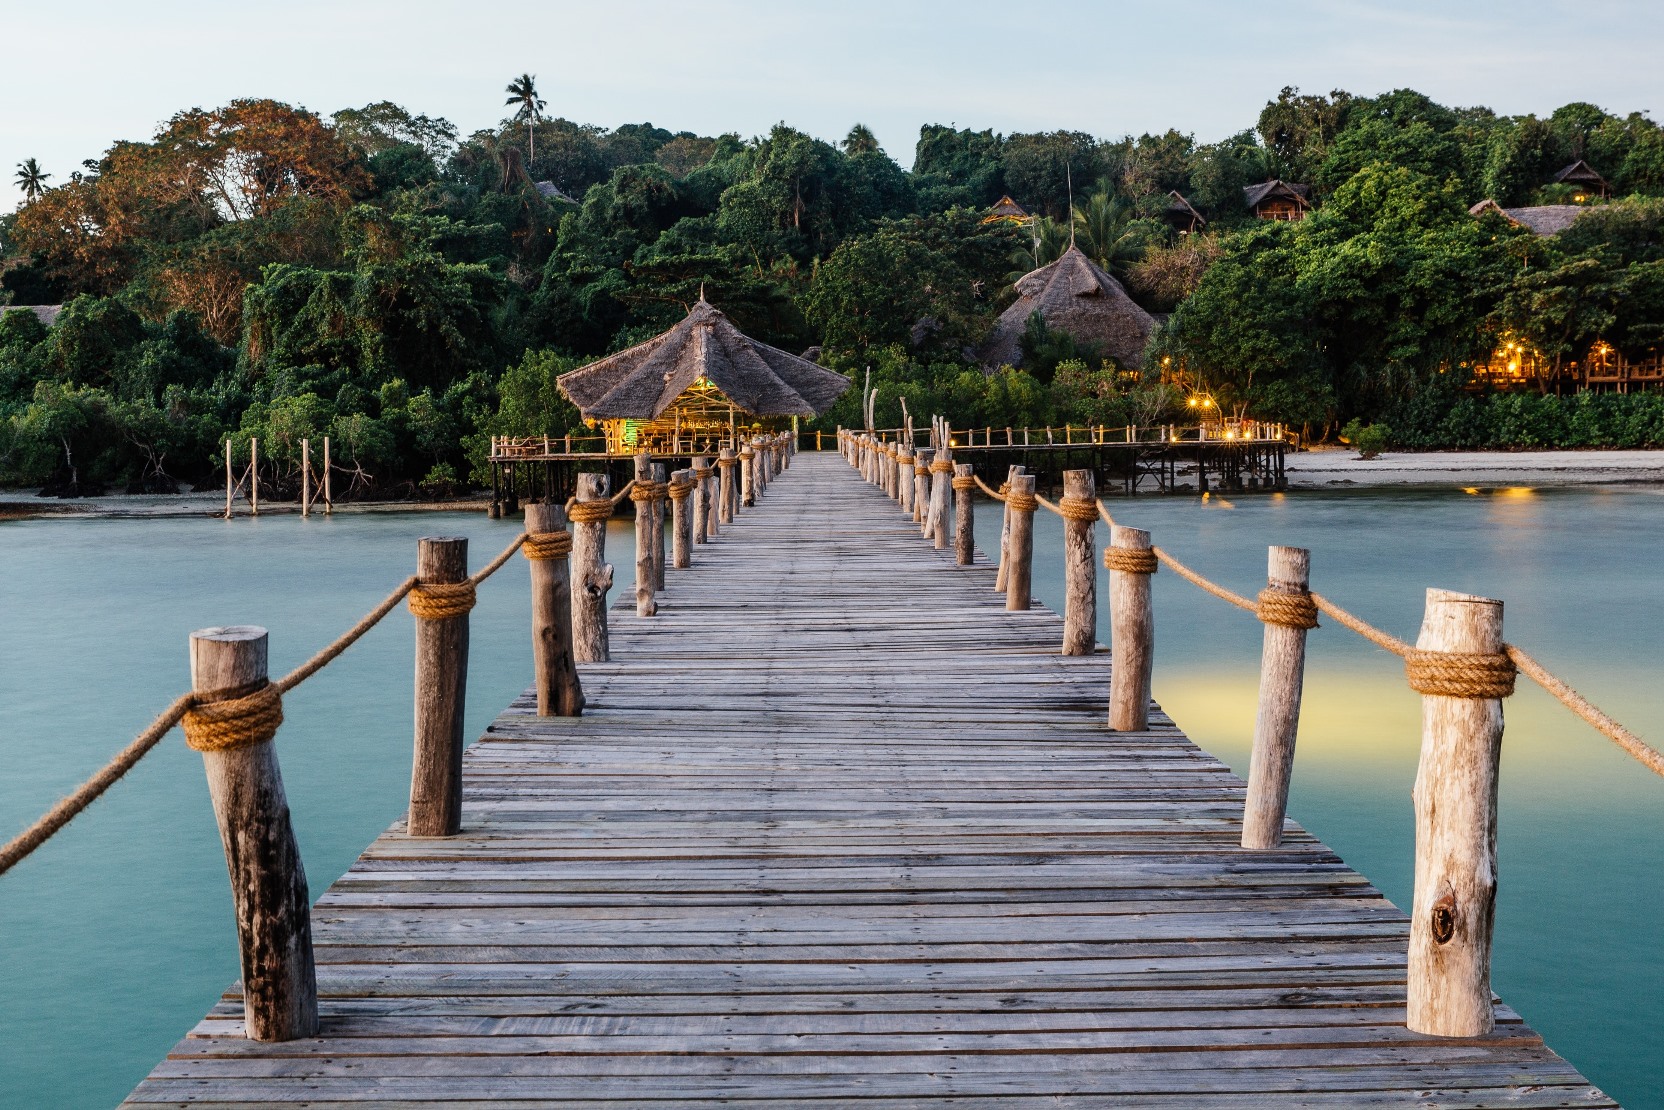 The arrival pier at Fundu Lagoon